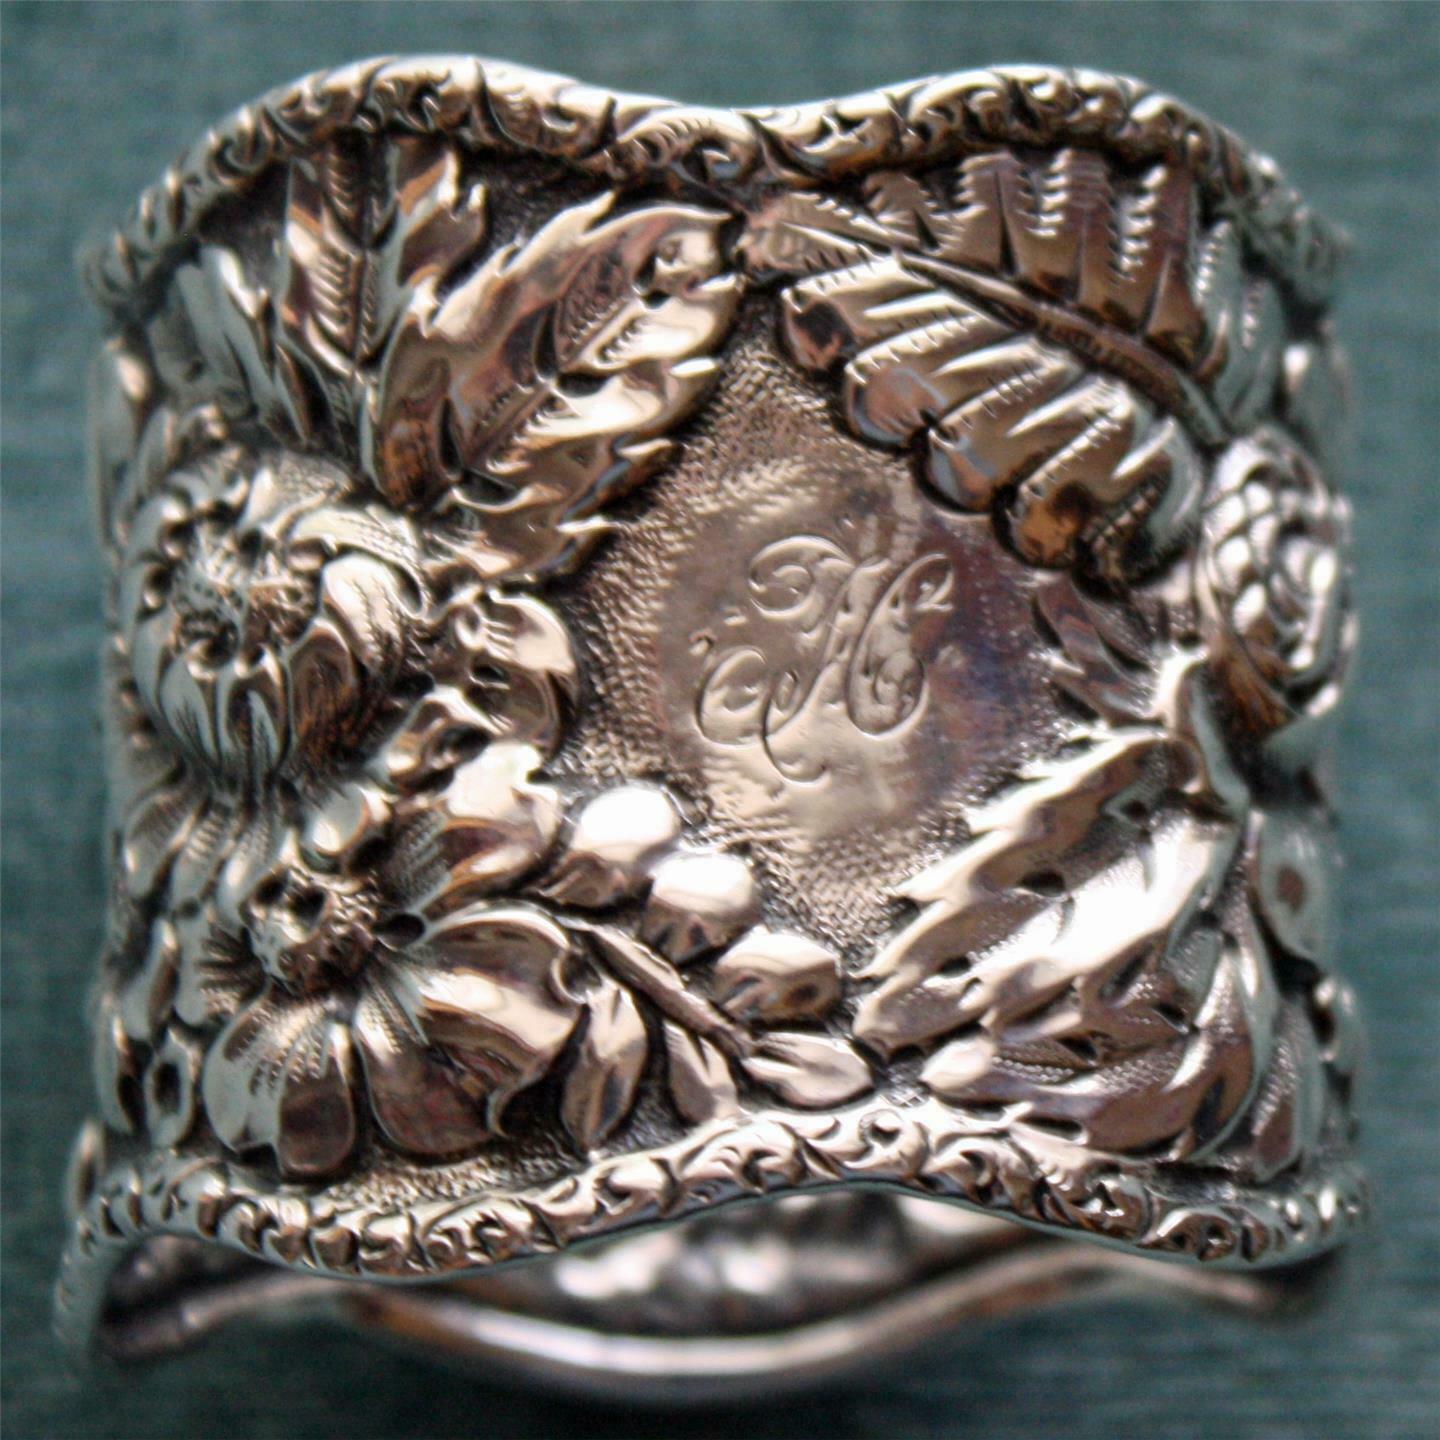 Antique American Sterling Repousse Napkin Ring, Ferns And Flowers